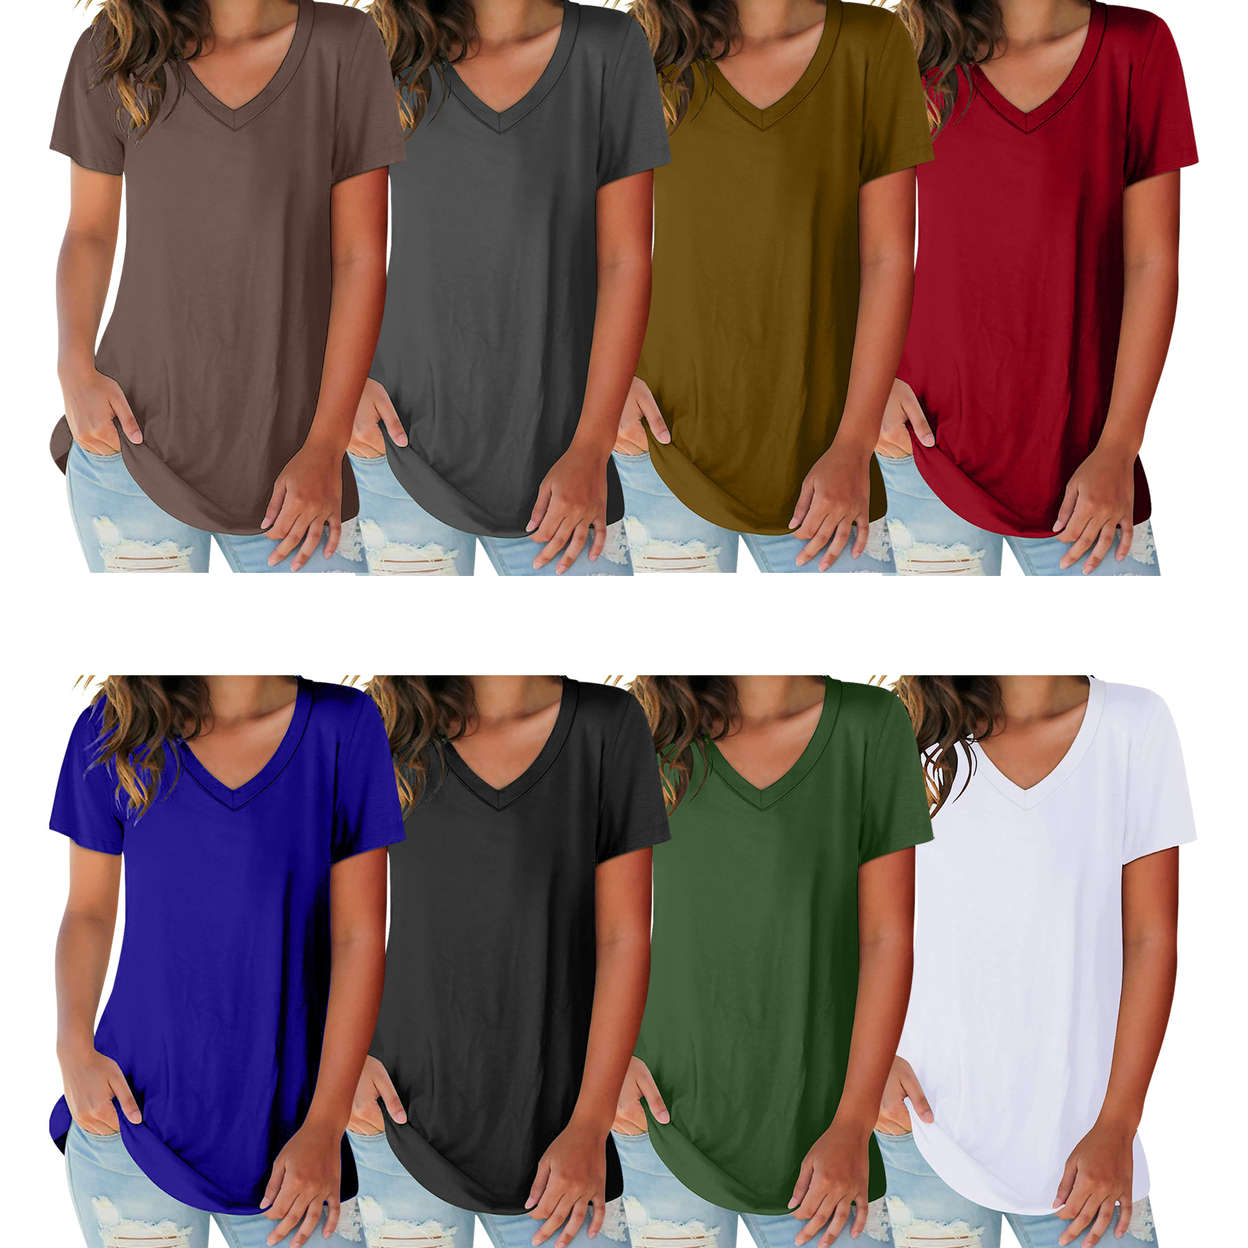 3-Pack: Women's Ultra Soft Smooth Cotton Blend Basic V-Neck Short Sleeve Shirts - Black White, Red, Small